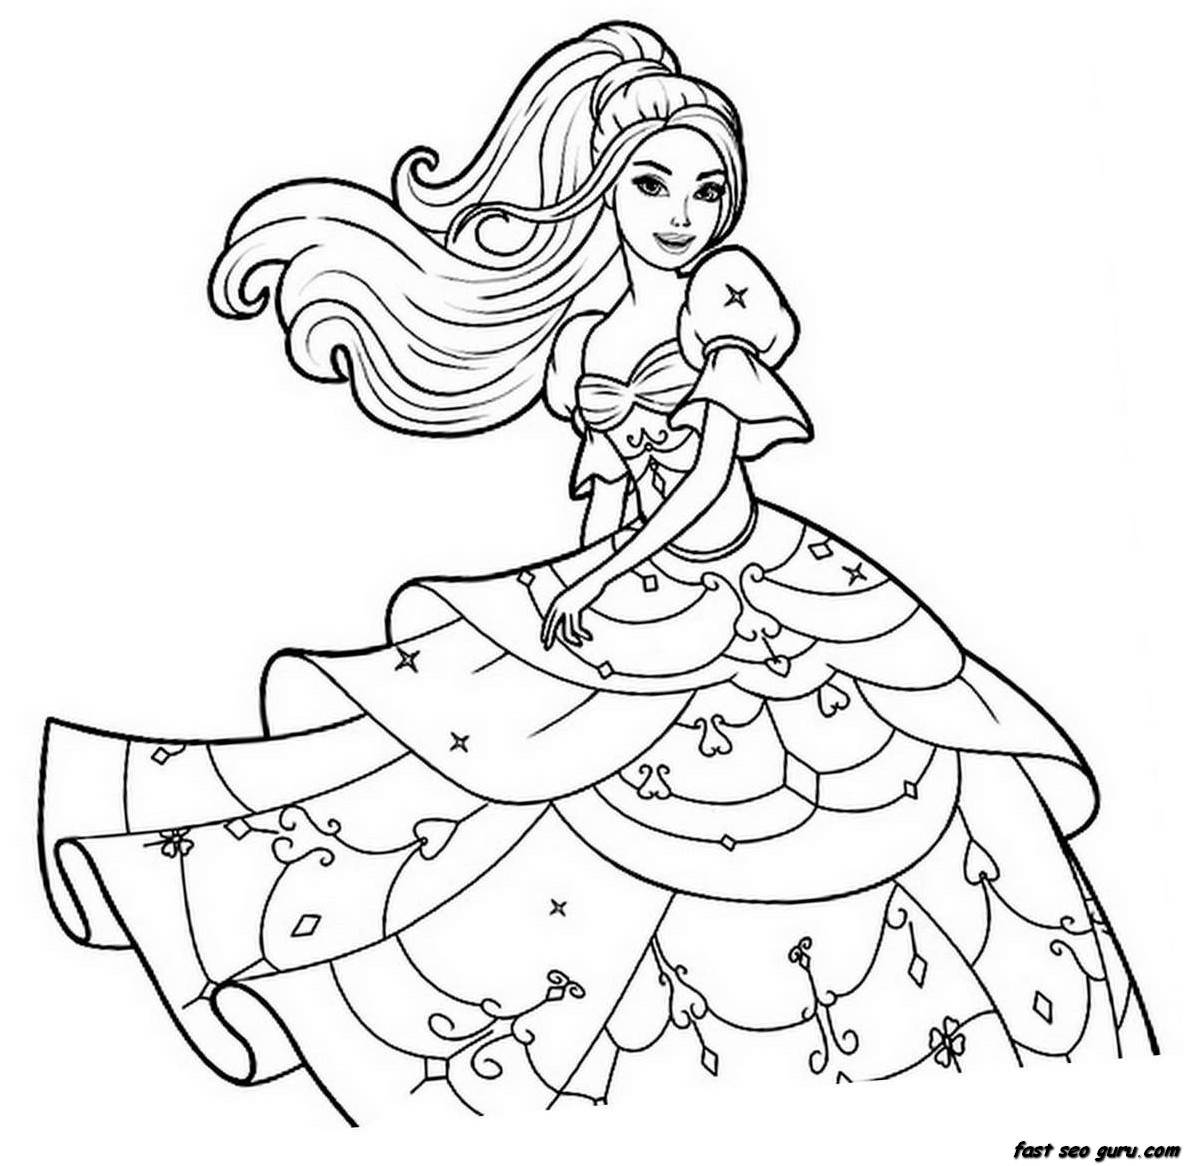  Coloring Pages To Print For Girls 8